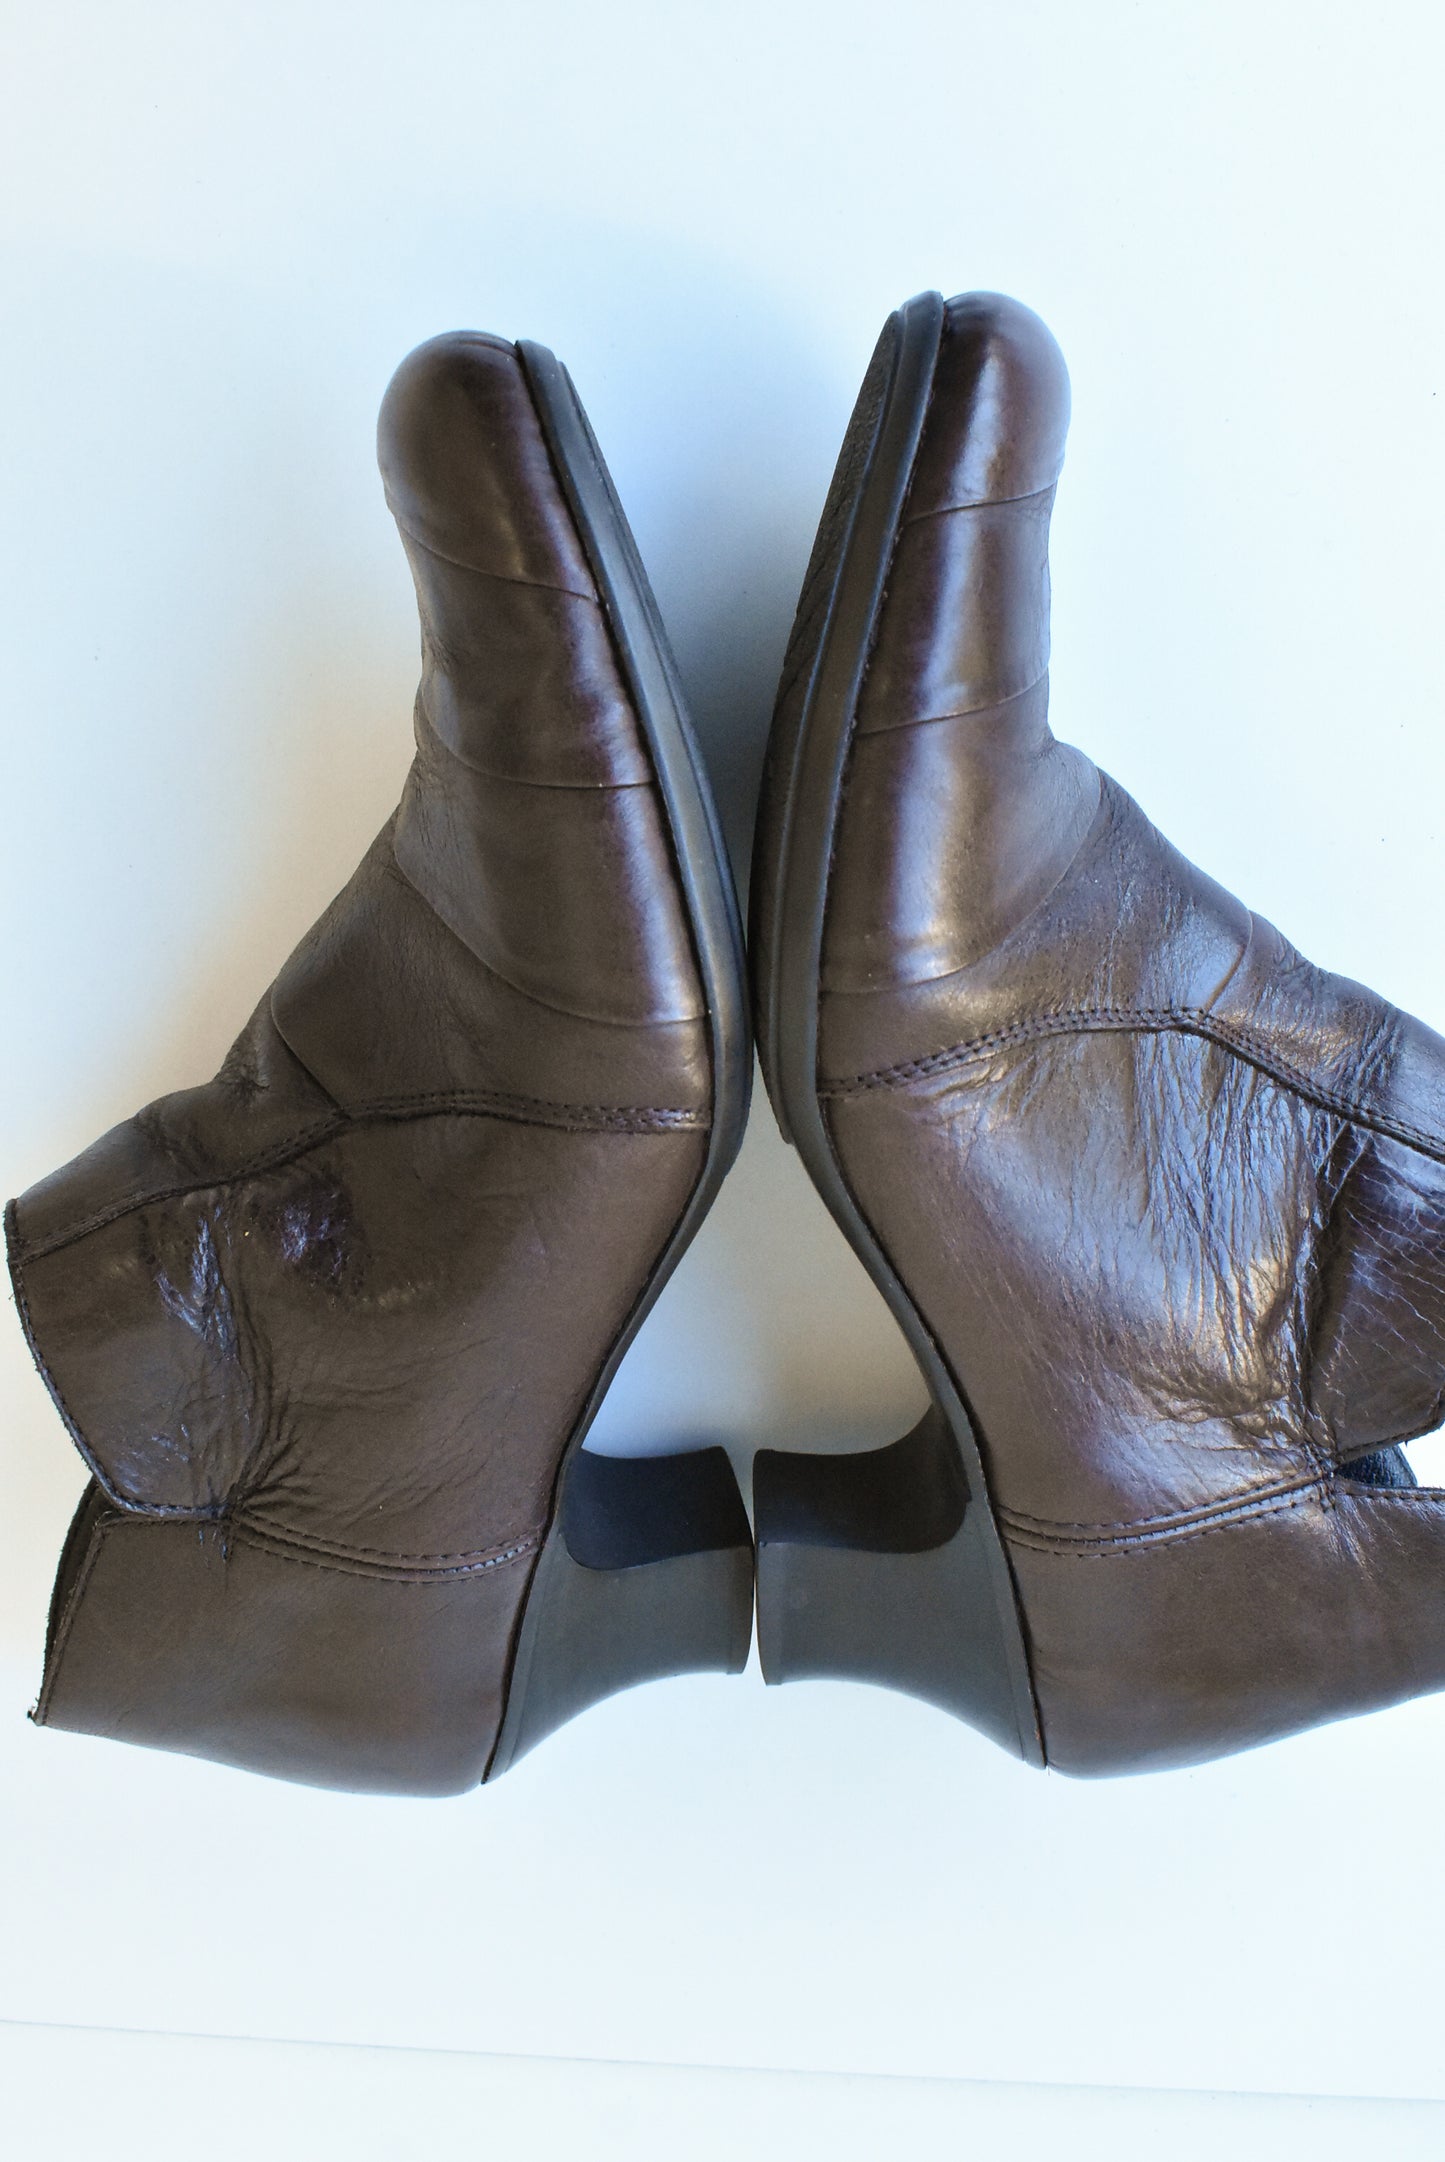 Rieker brown leather boots, 39